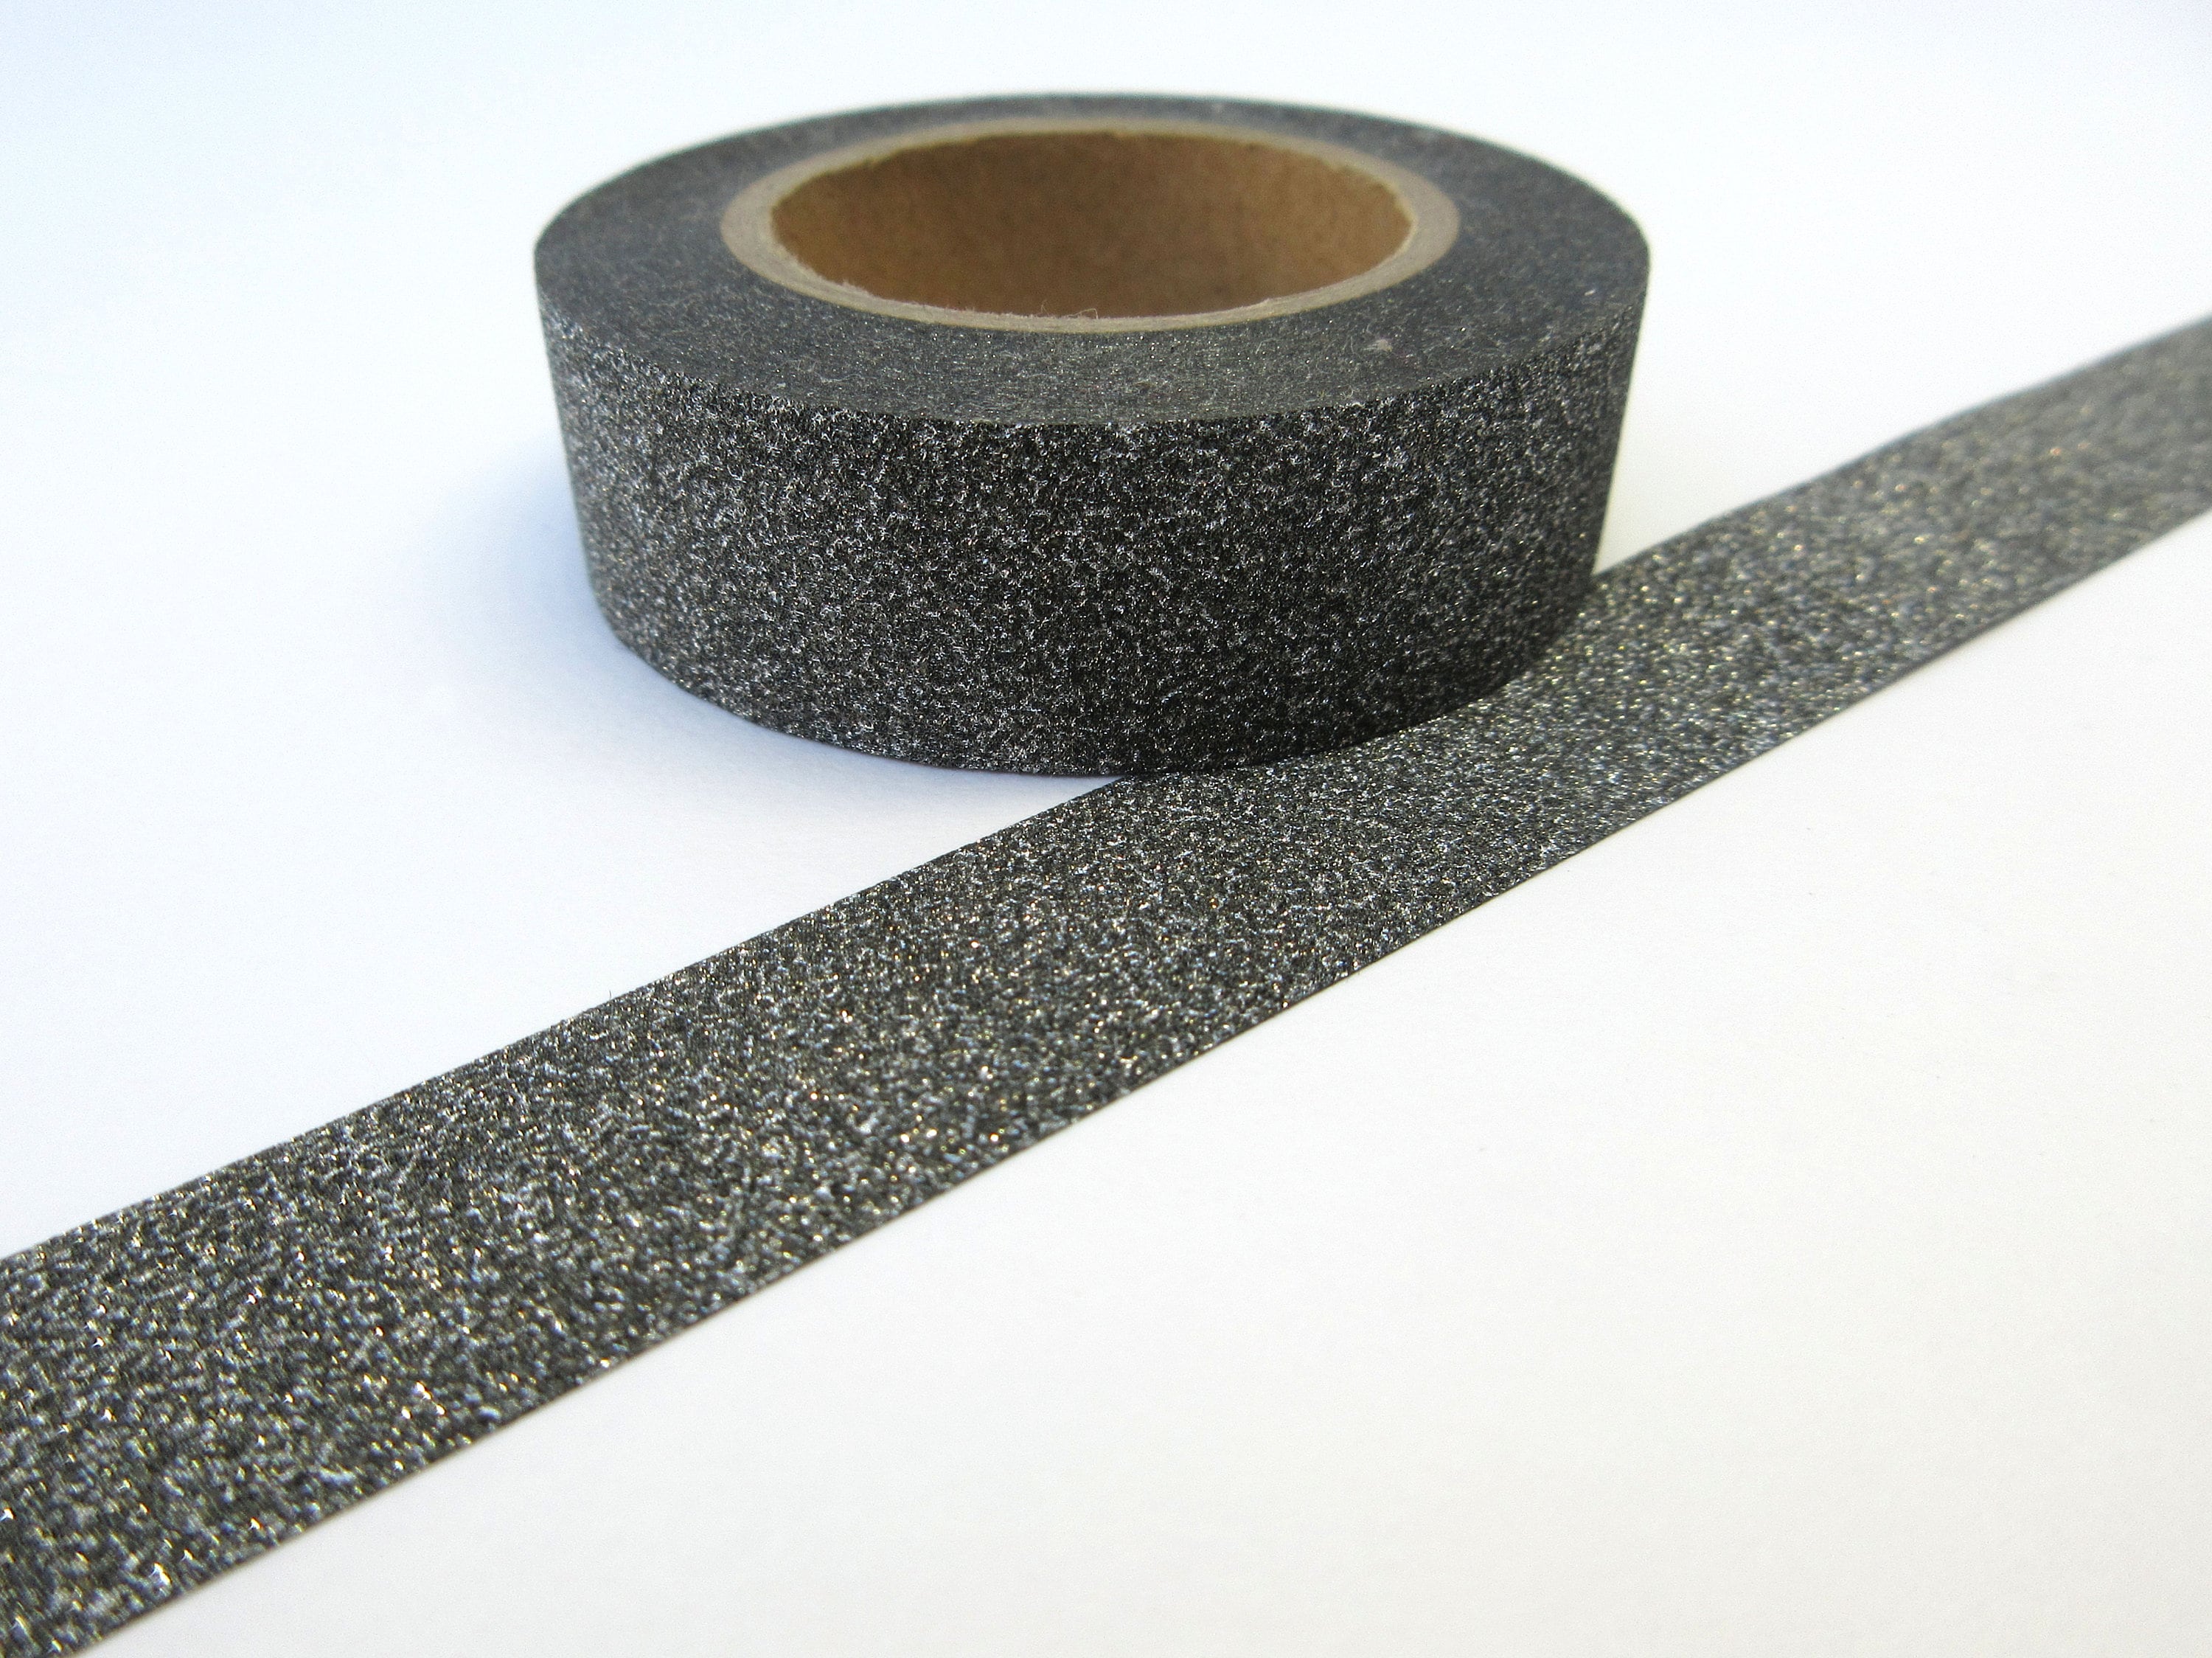 Hat Tape 30 Mm BLACK TEXTURE Bias Tape Sweatband Hat Filler for Metres  Millinery Supply PBN/FO0 